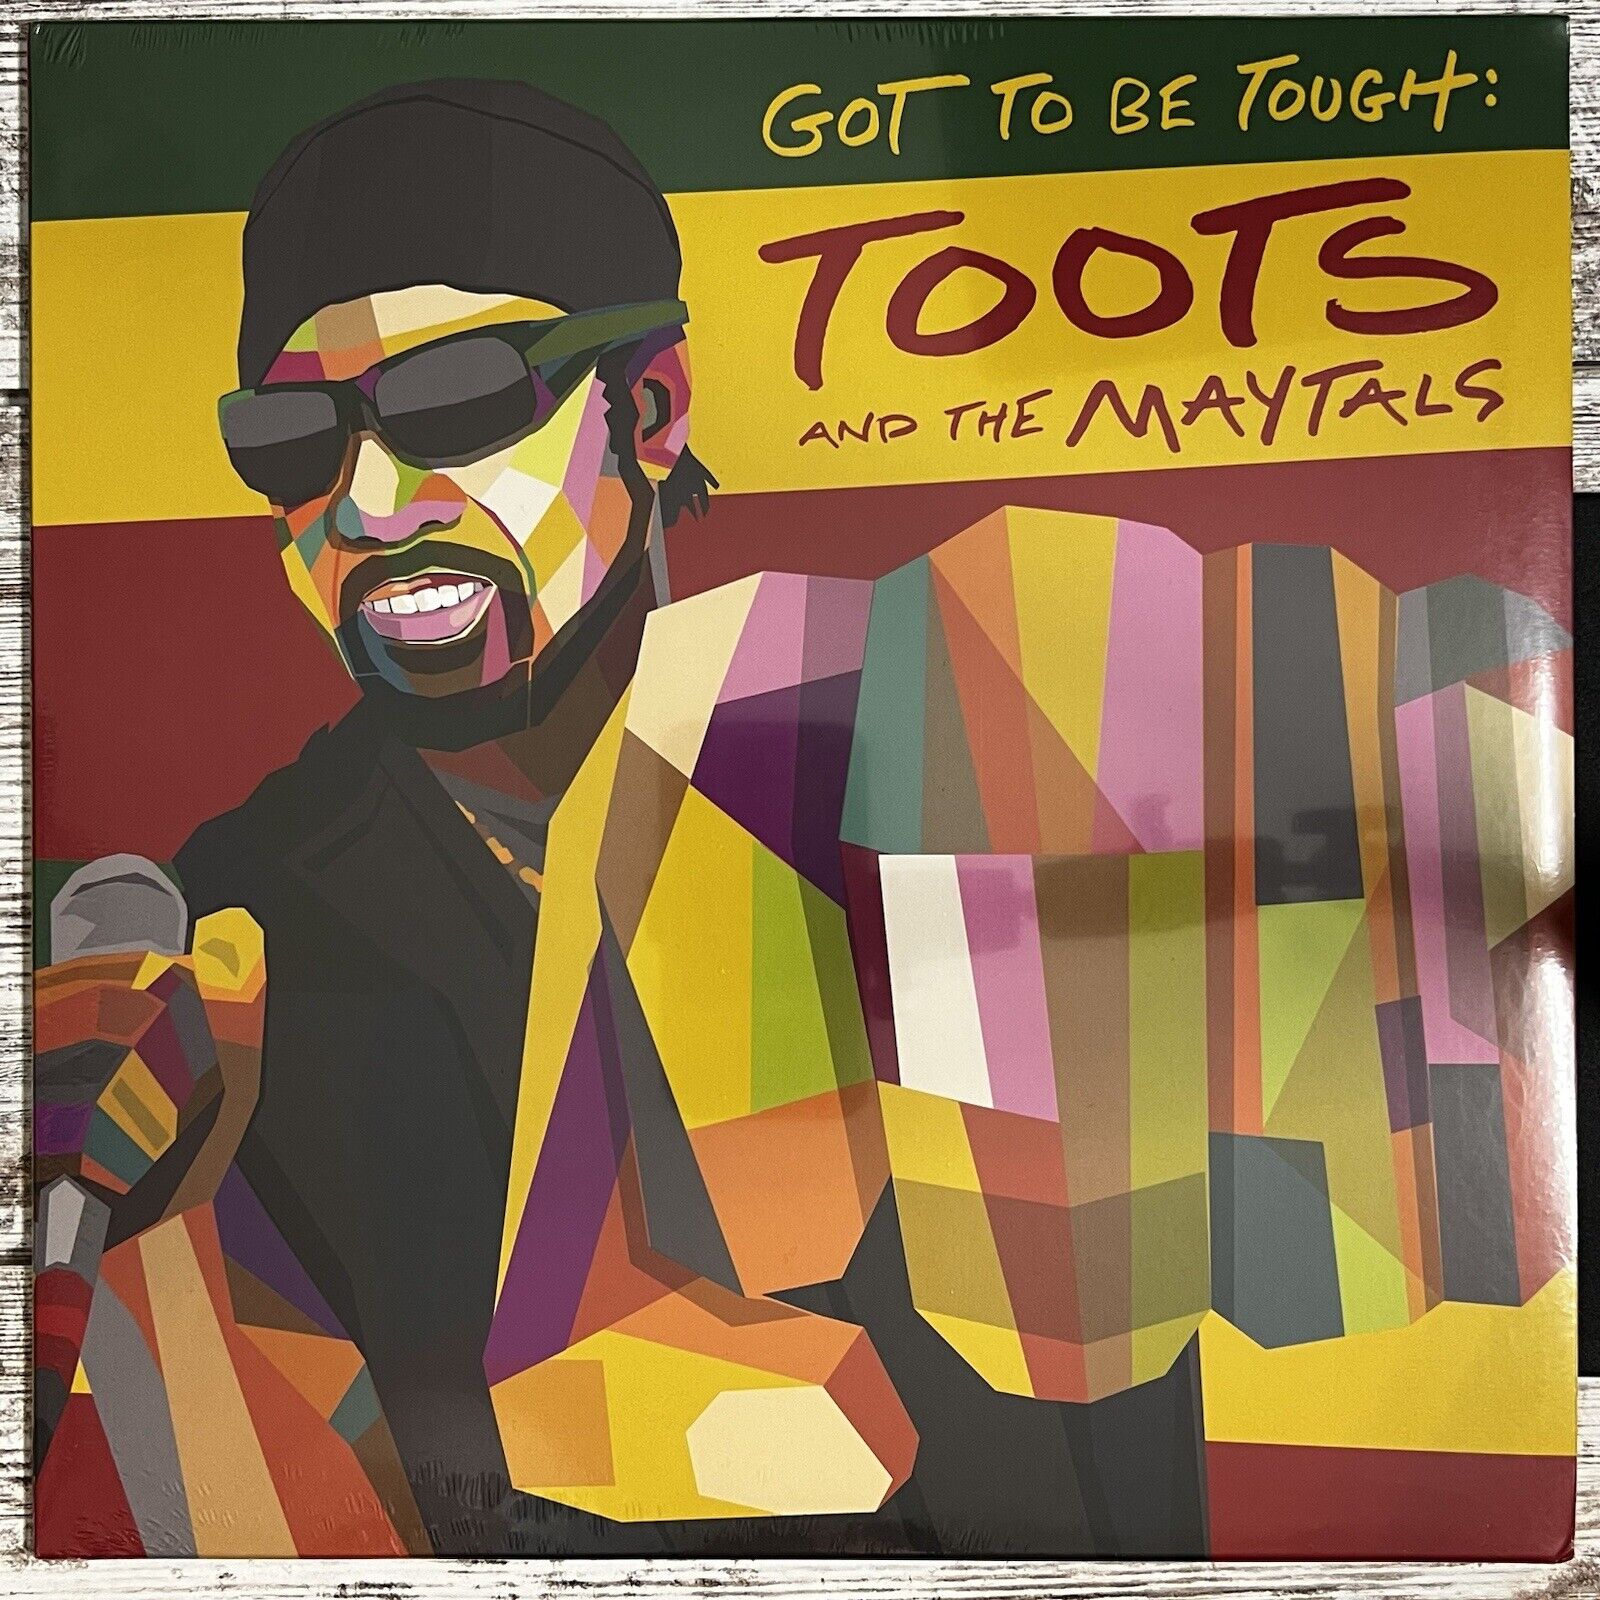 Got To Be Tough by Toots & Maytals (Record, 2020)